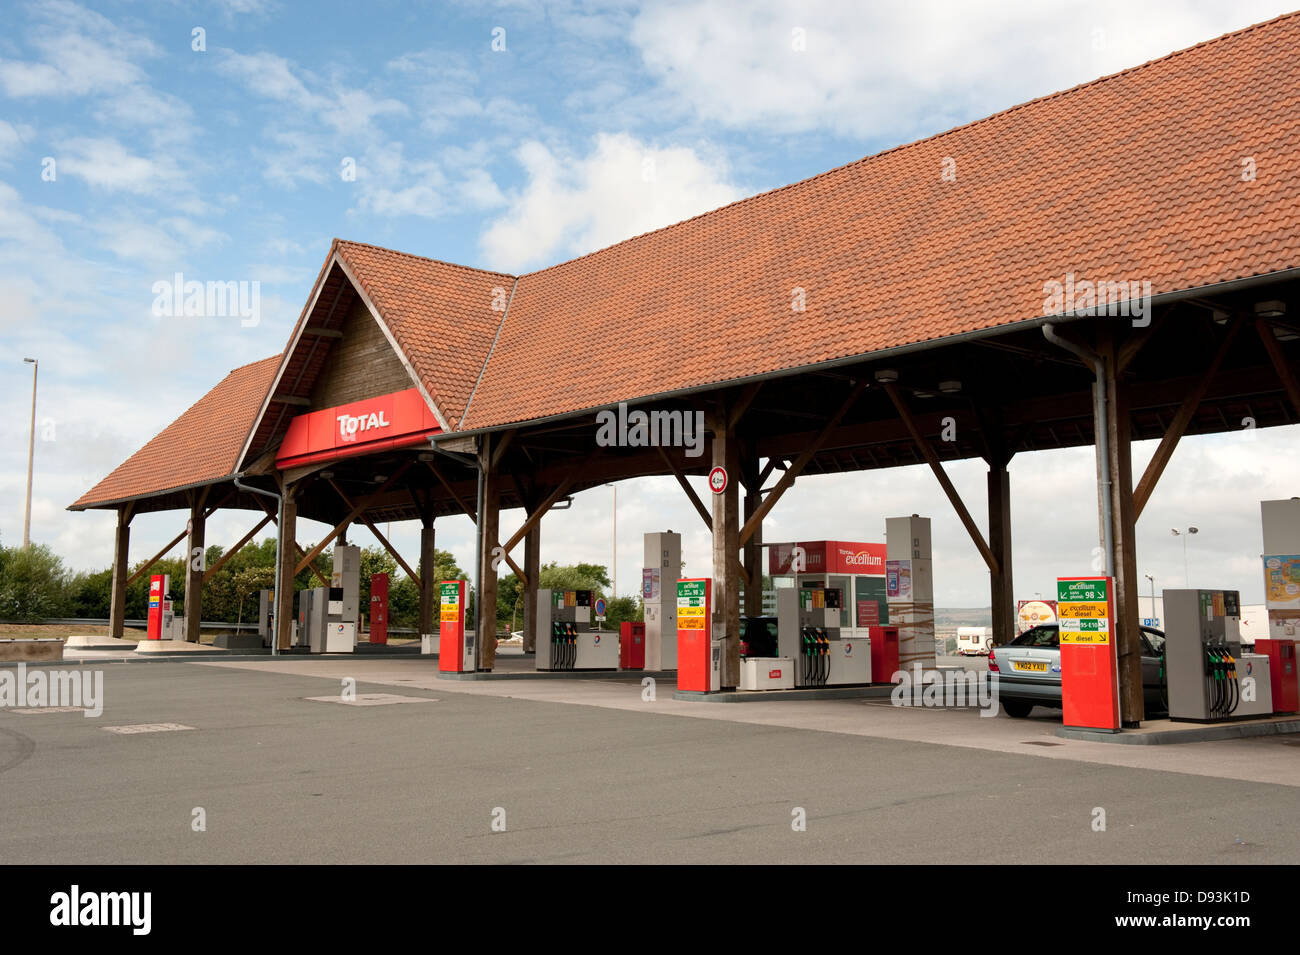 Total Petrol Gas Station Rest Area France Europe Stock Photo